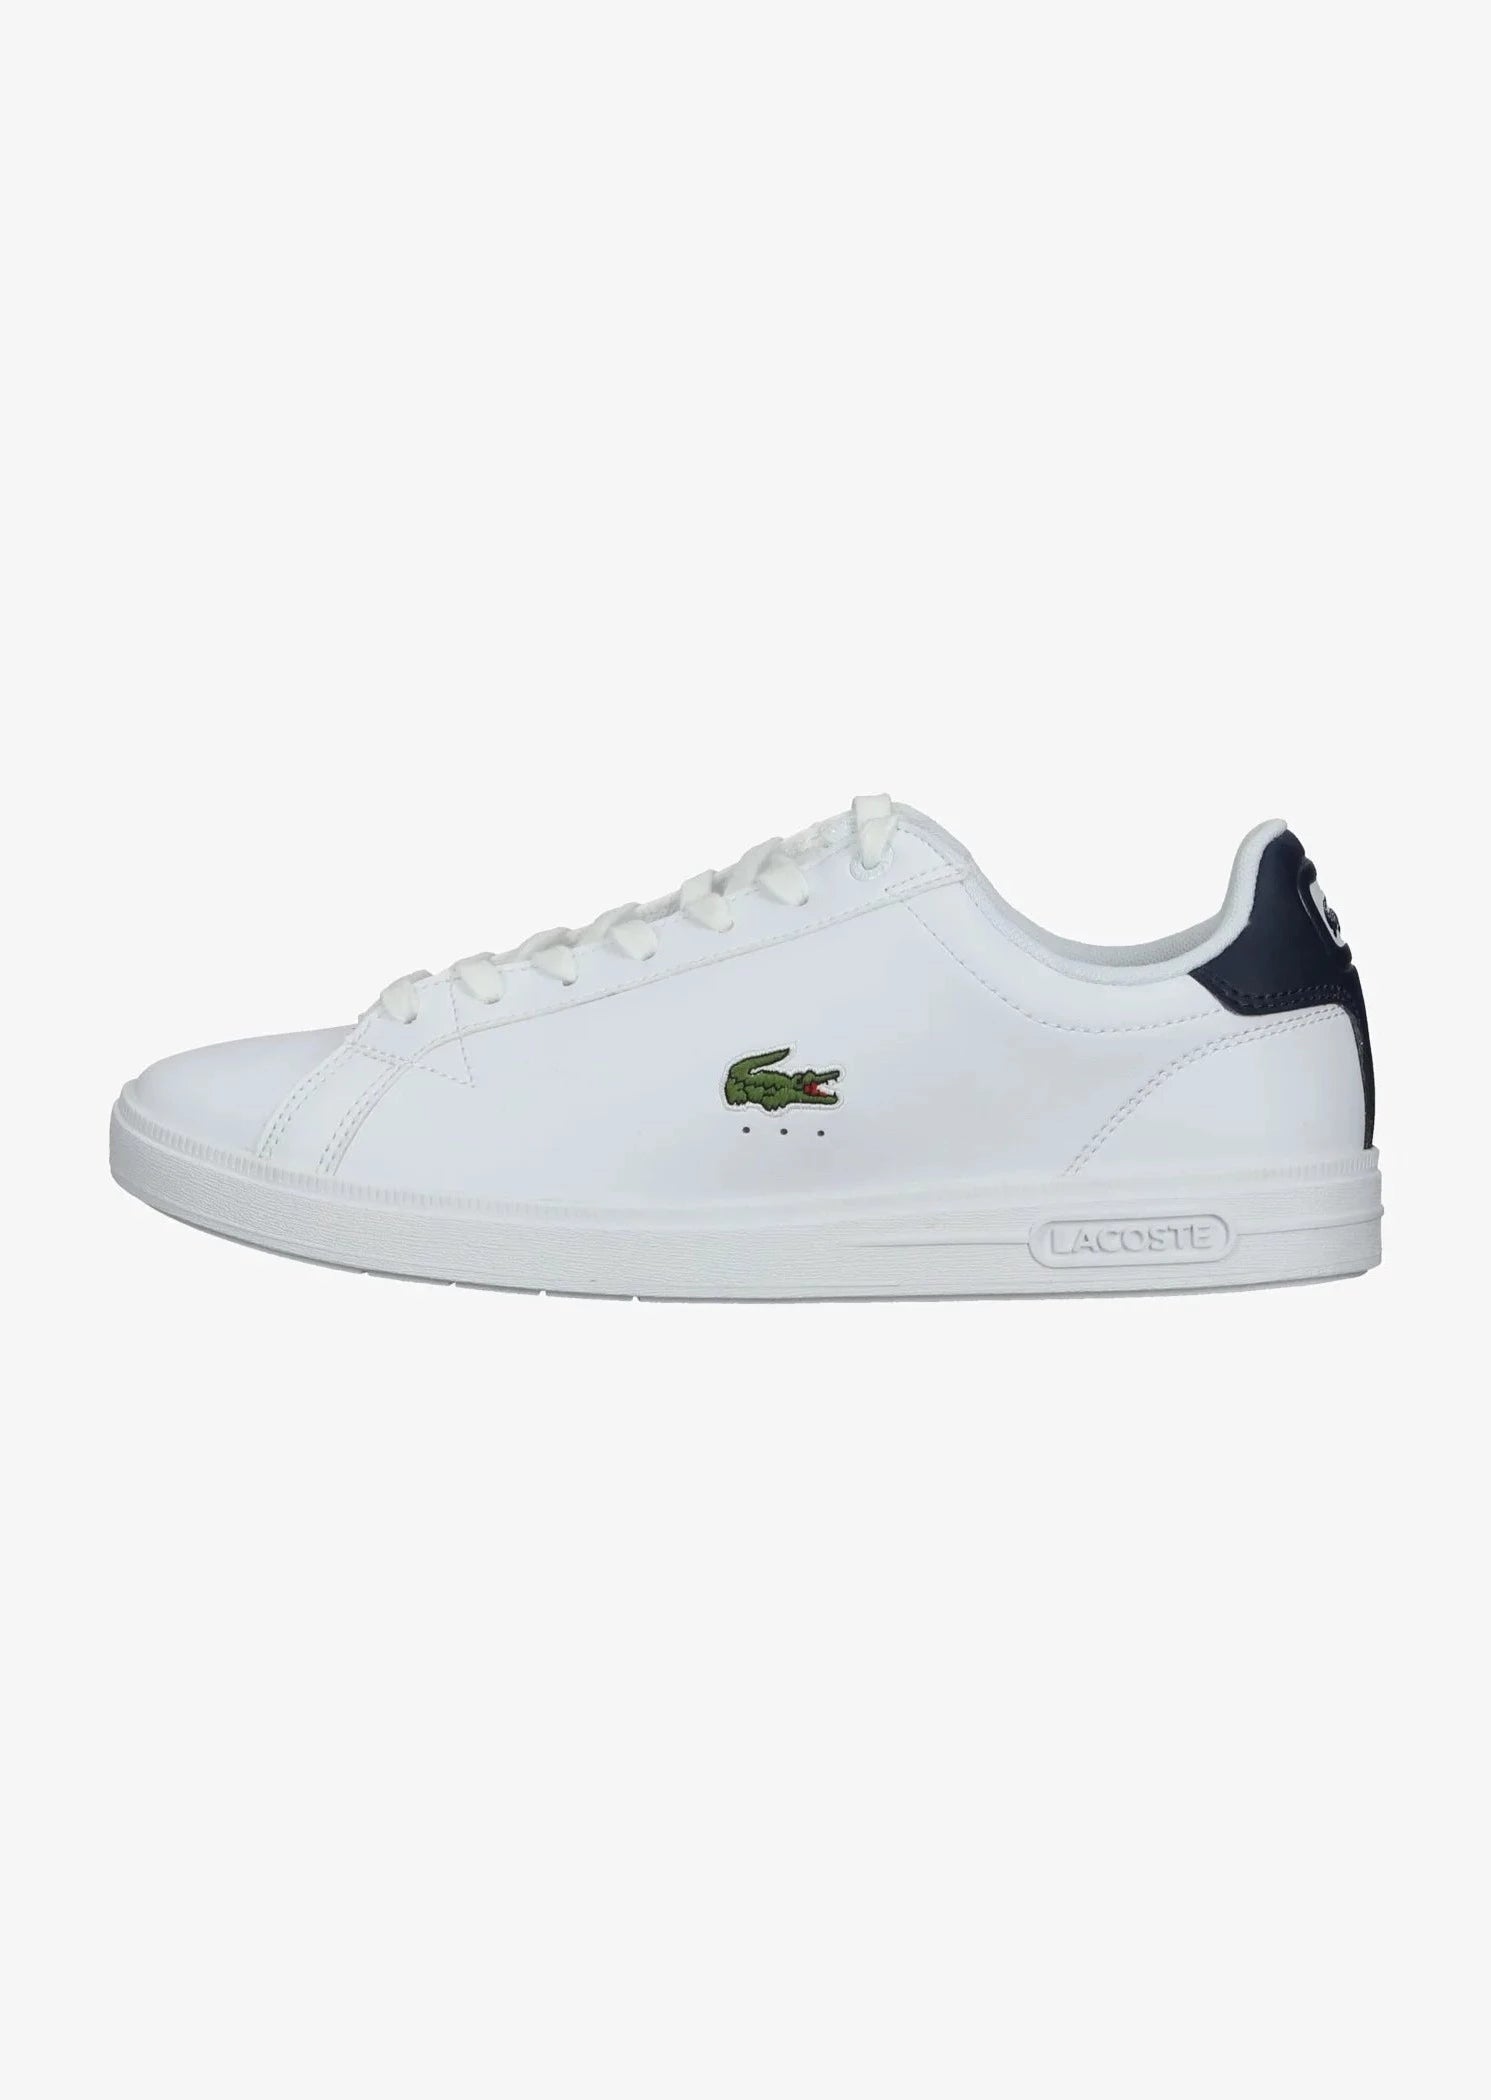 Baskets Lacoste blanches | Georgespaul